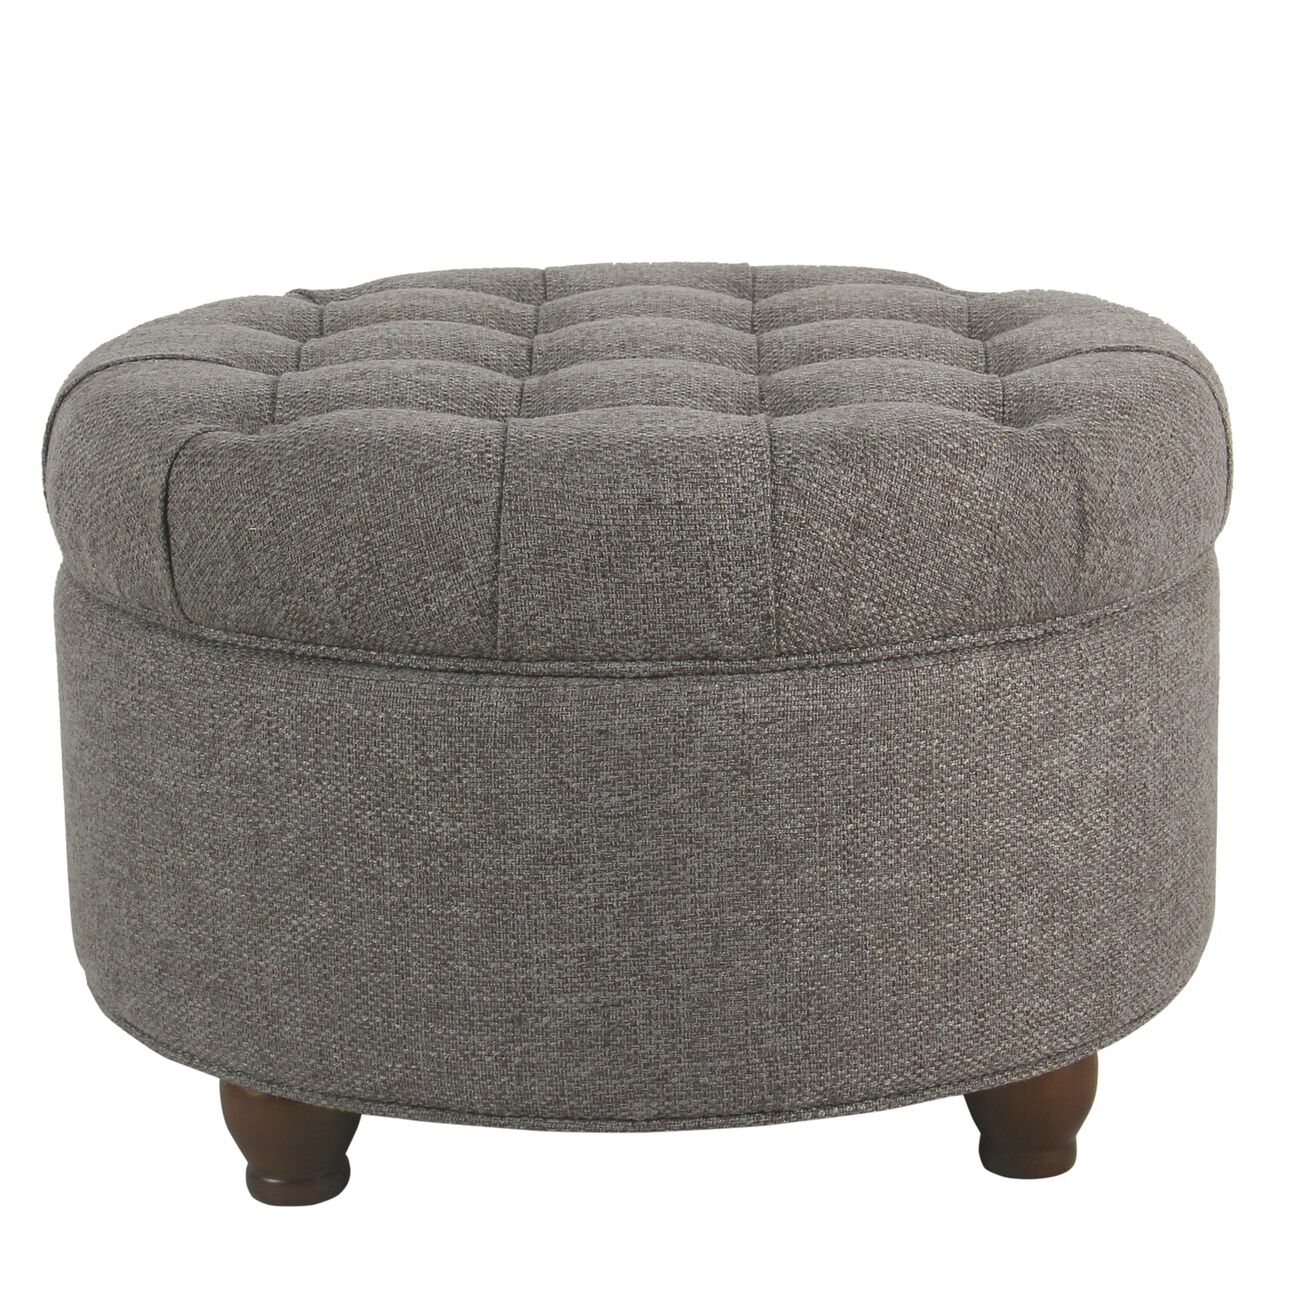 Fabric Upholstered Wooden Ottoman with Tufted Lift Off Lid Storage, Dark Gray